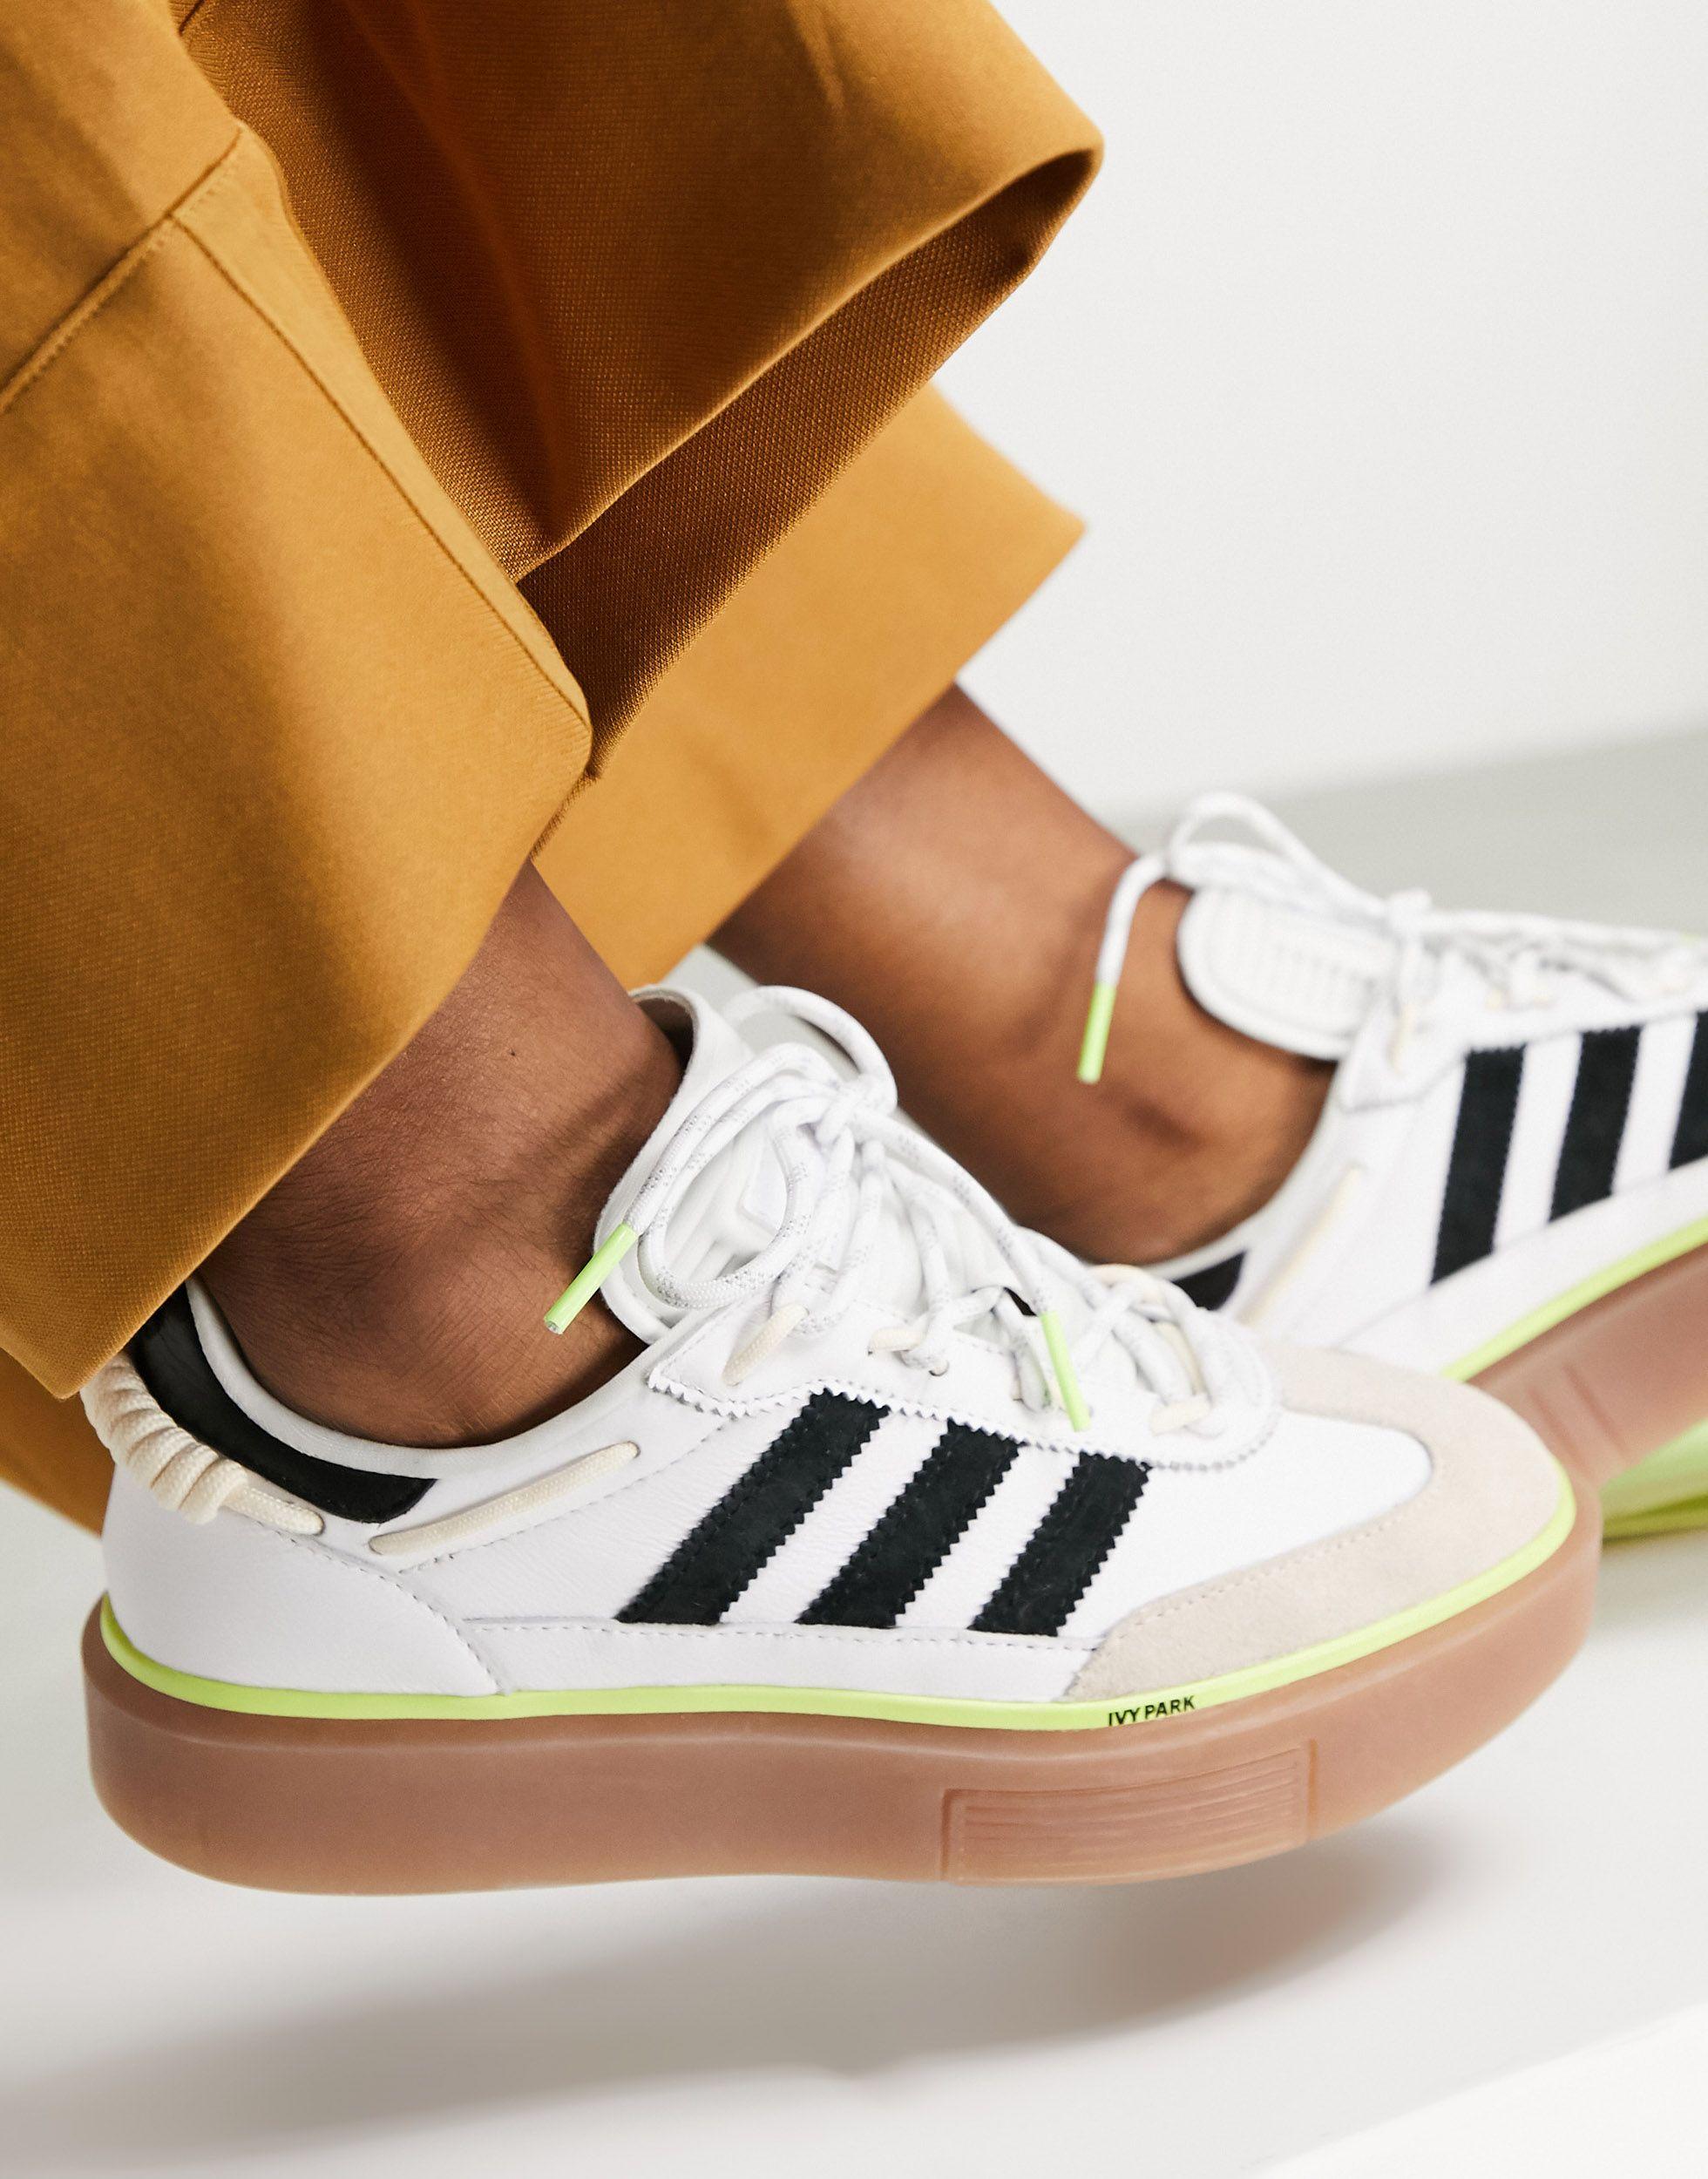 Ivy Park Rubber Adidas X Super Sleek 72 Trainers in White | Lyst